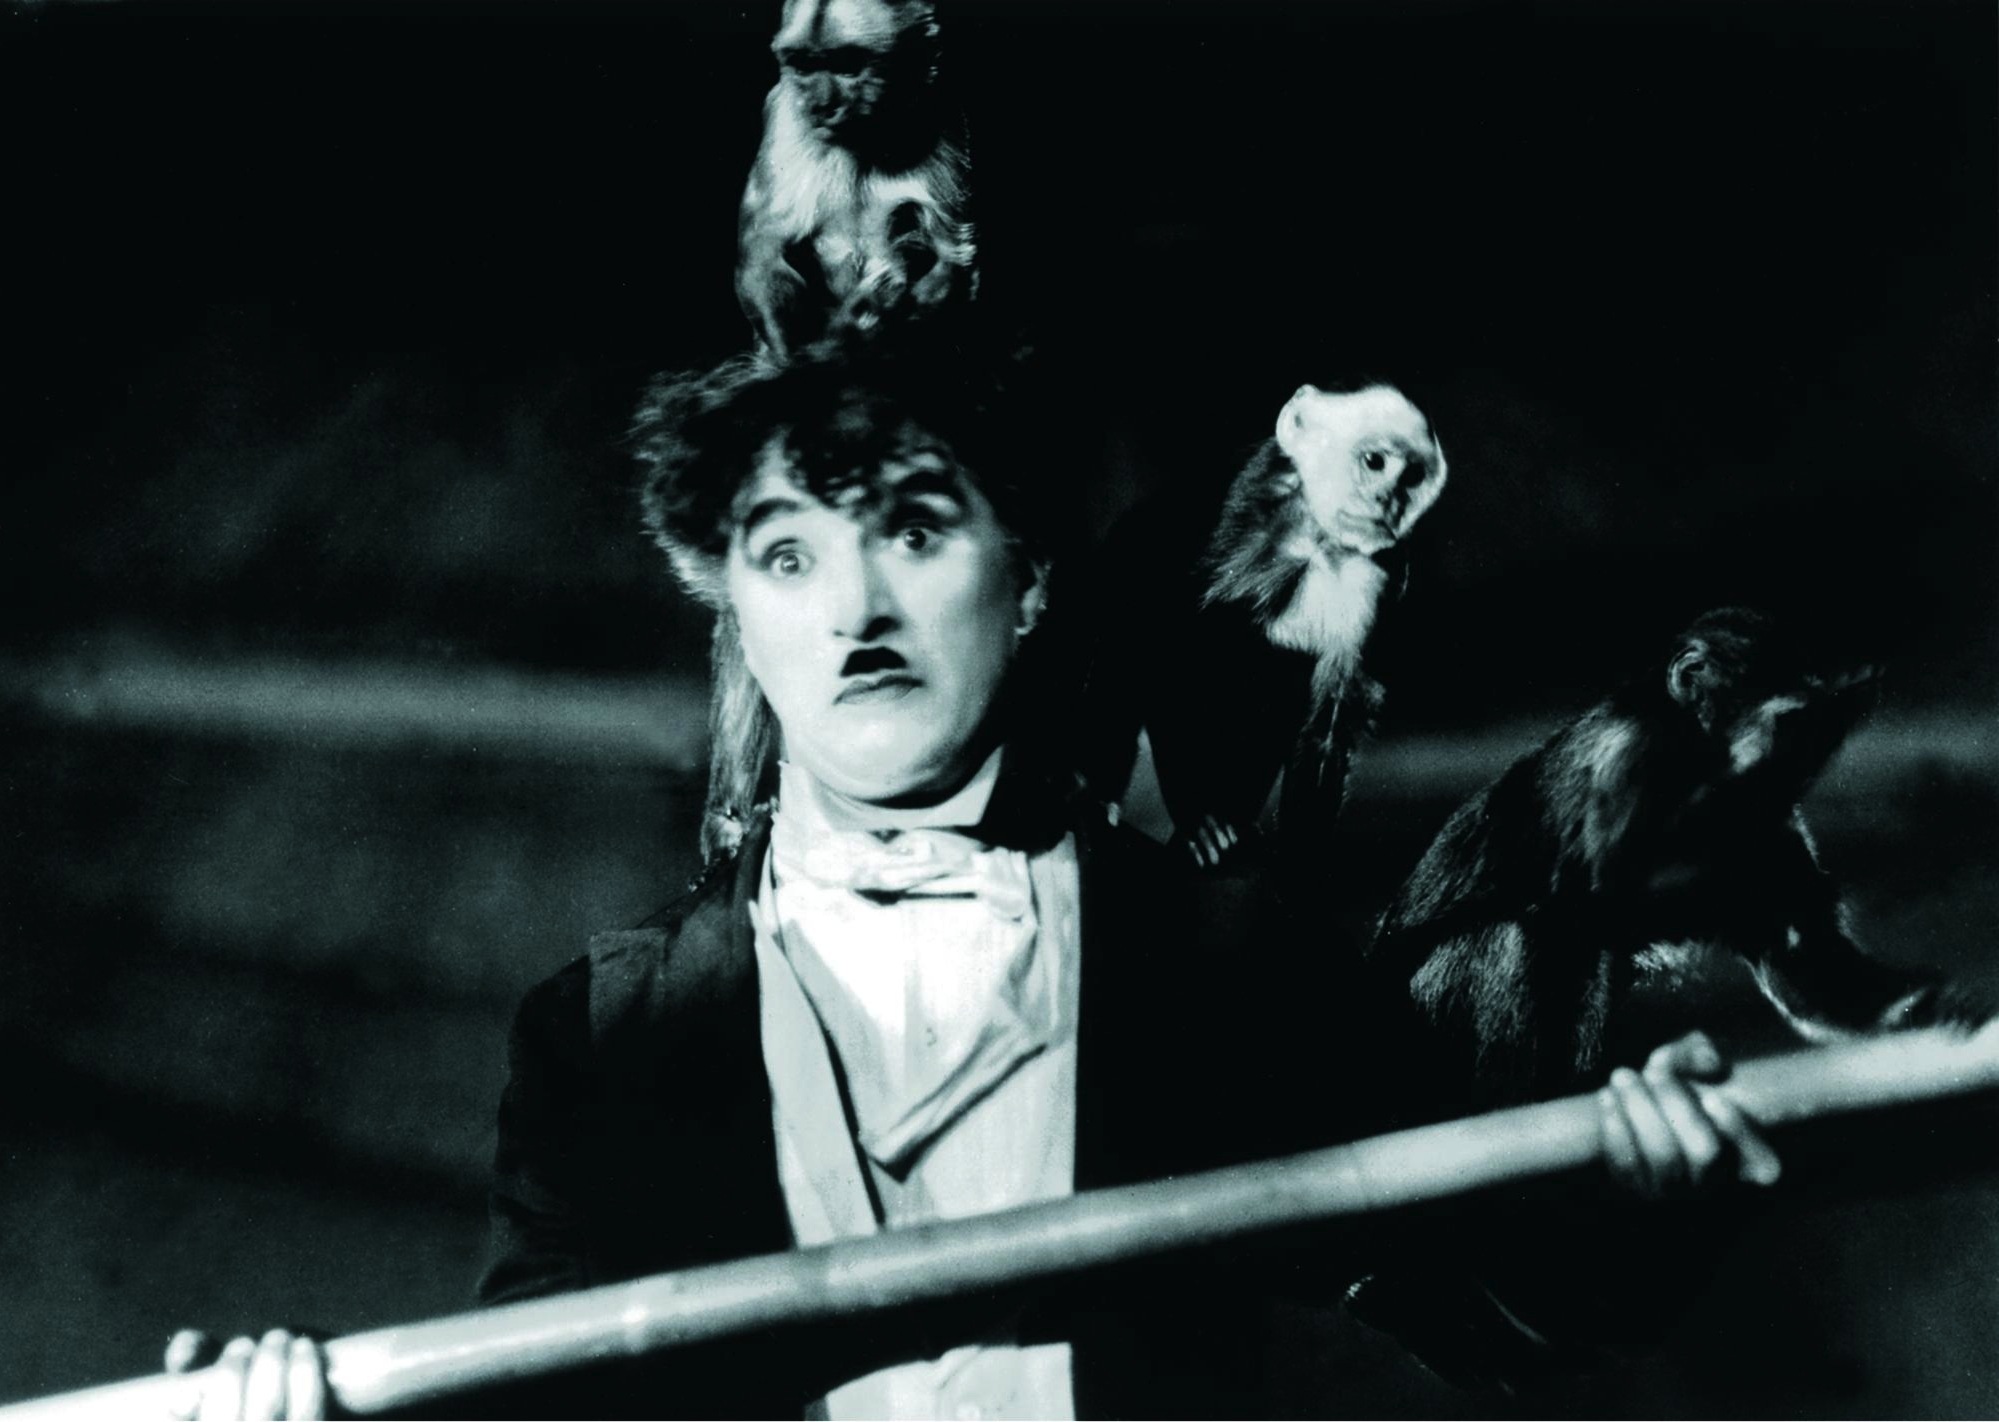 Still of Charles Chaplin in The Circus (1928)